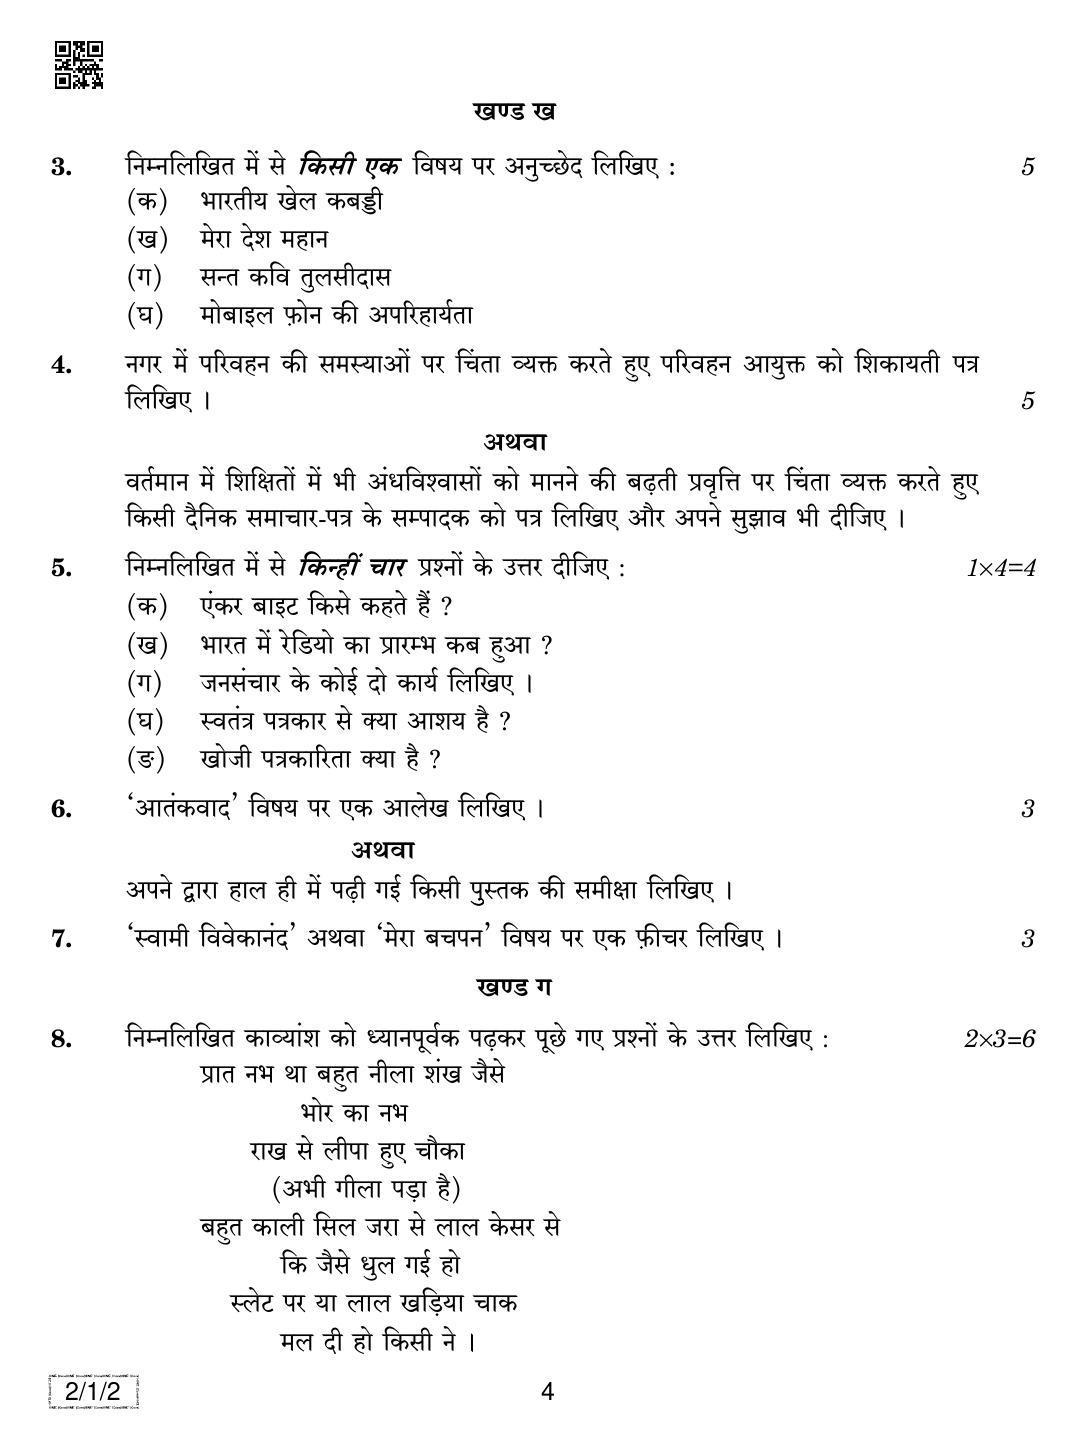 CBSE Class 12 2-1-2 HINDI CORE 2019 Compartment Question Paper - Page 4